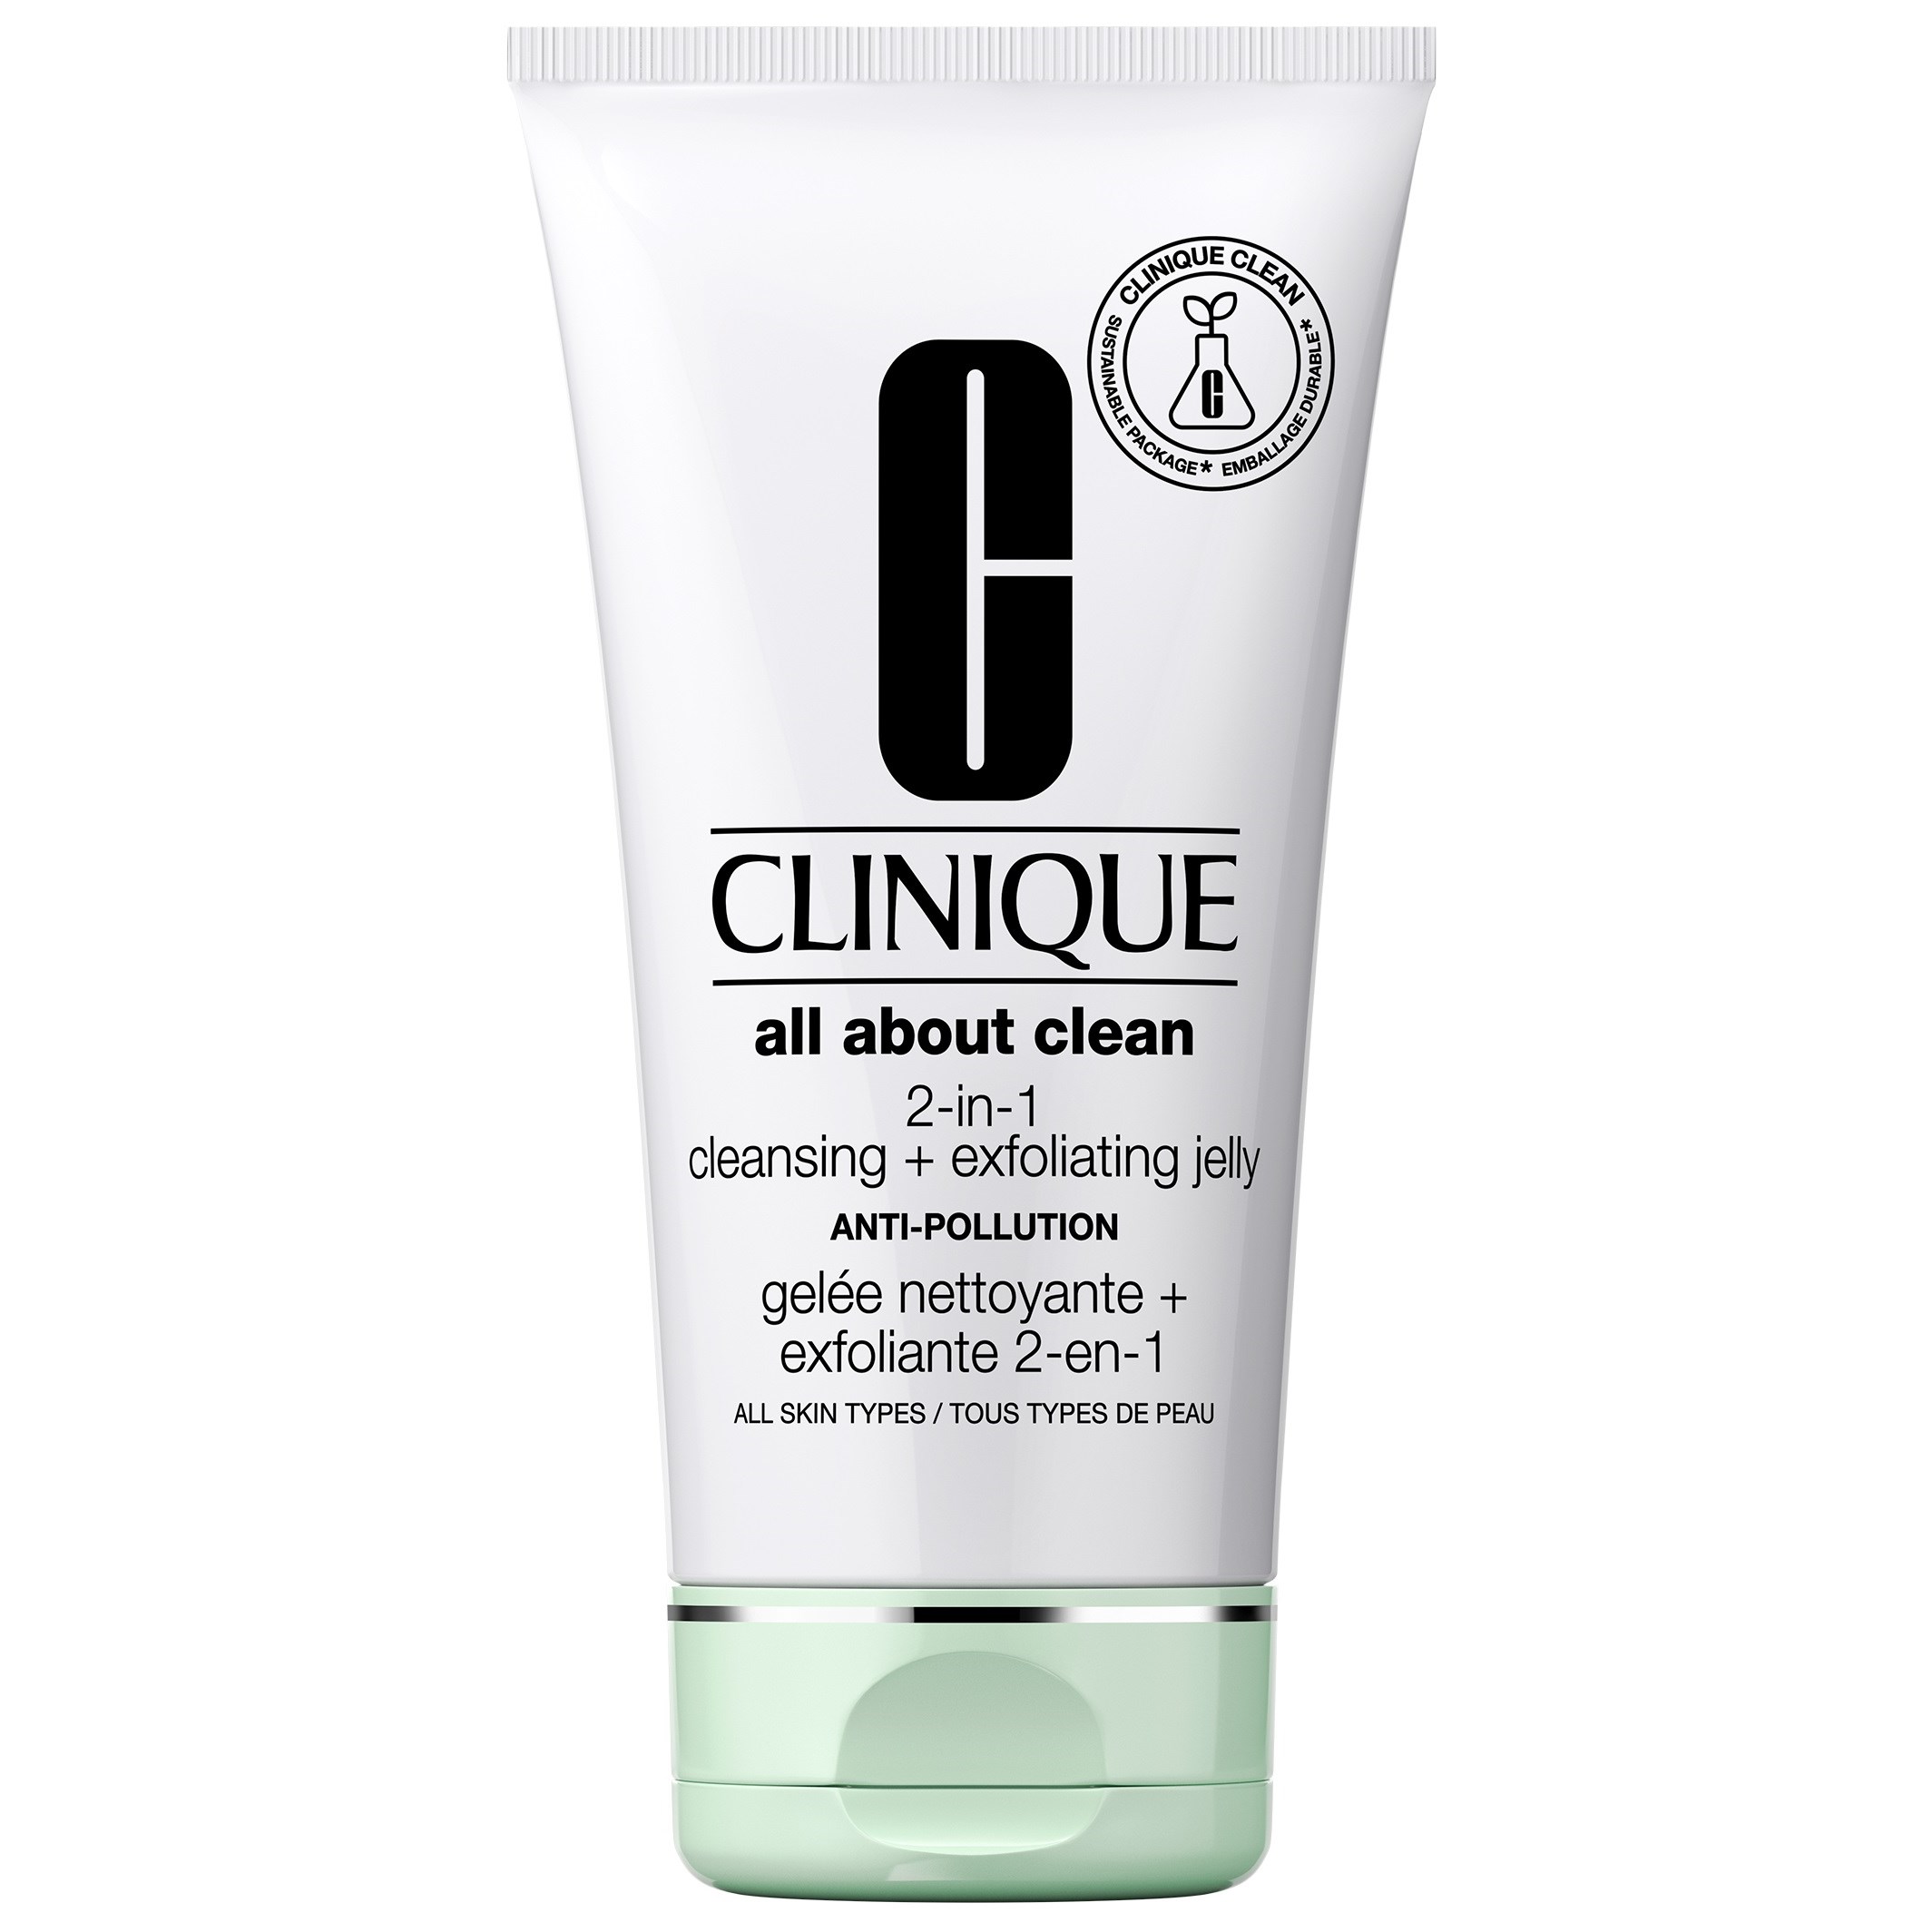 Bilde av Clinique All About Clean 2 In 1 Cleansing Exfoliating Jelly 150 Ml